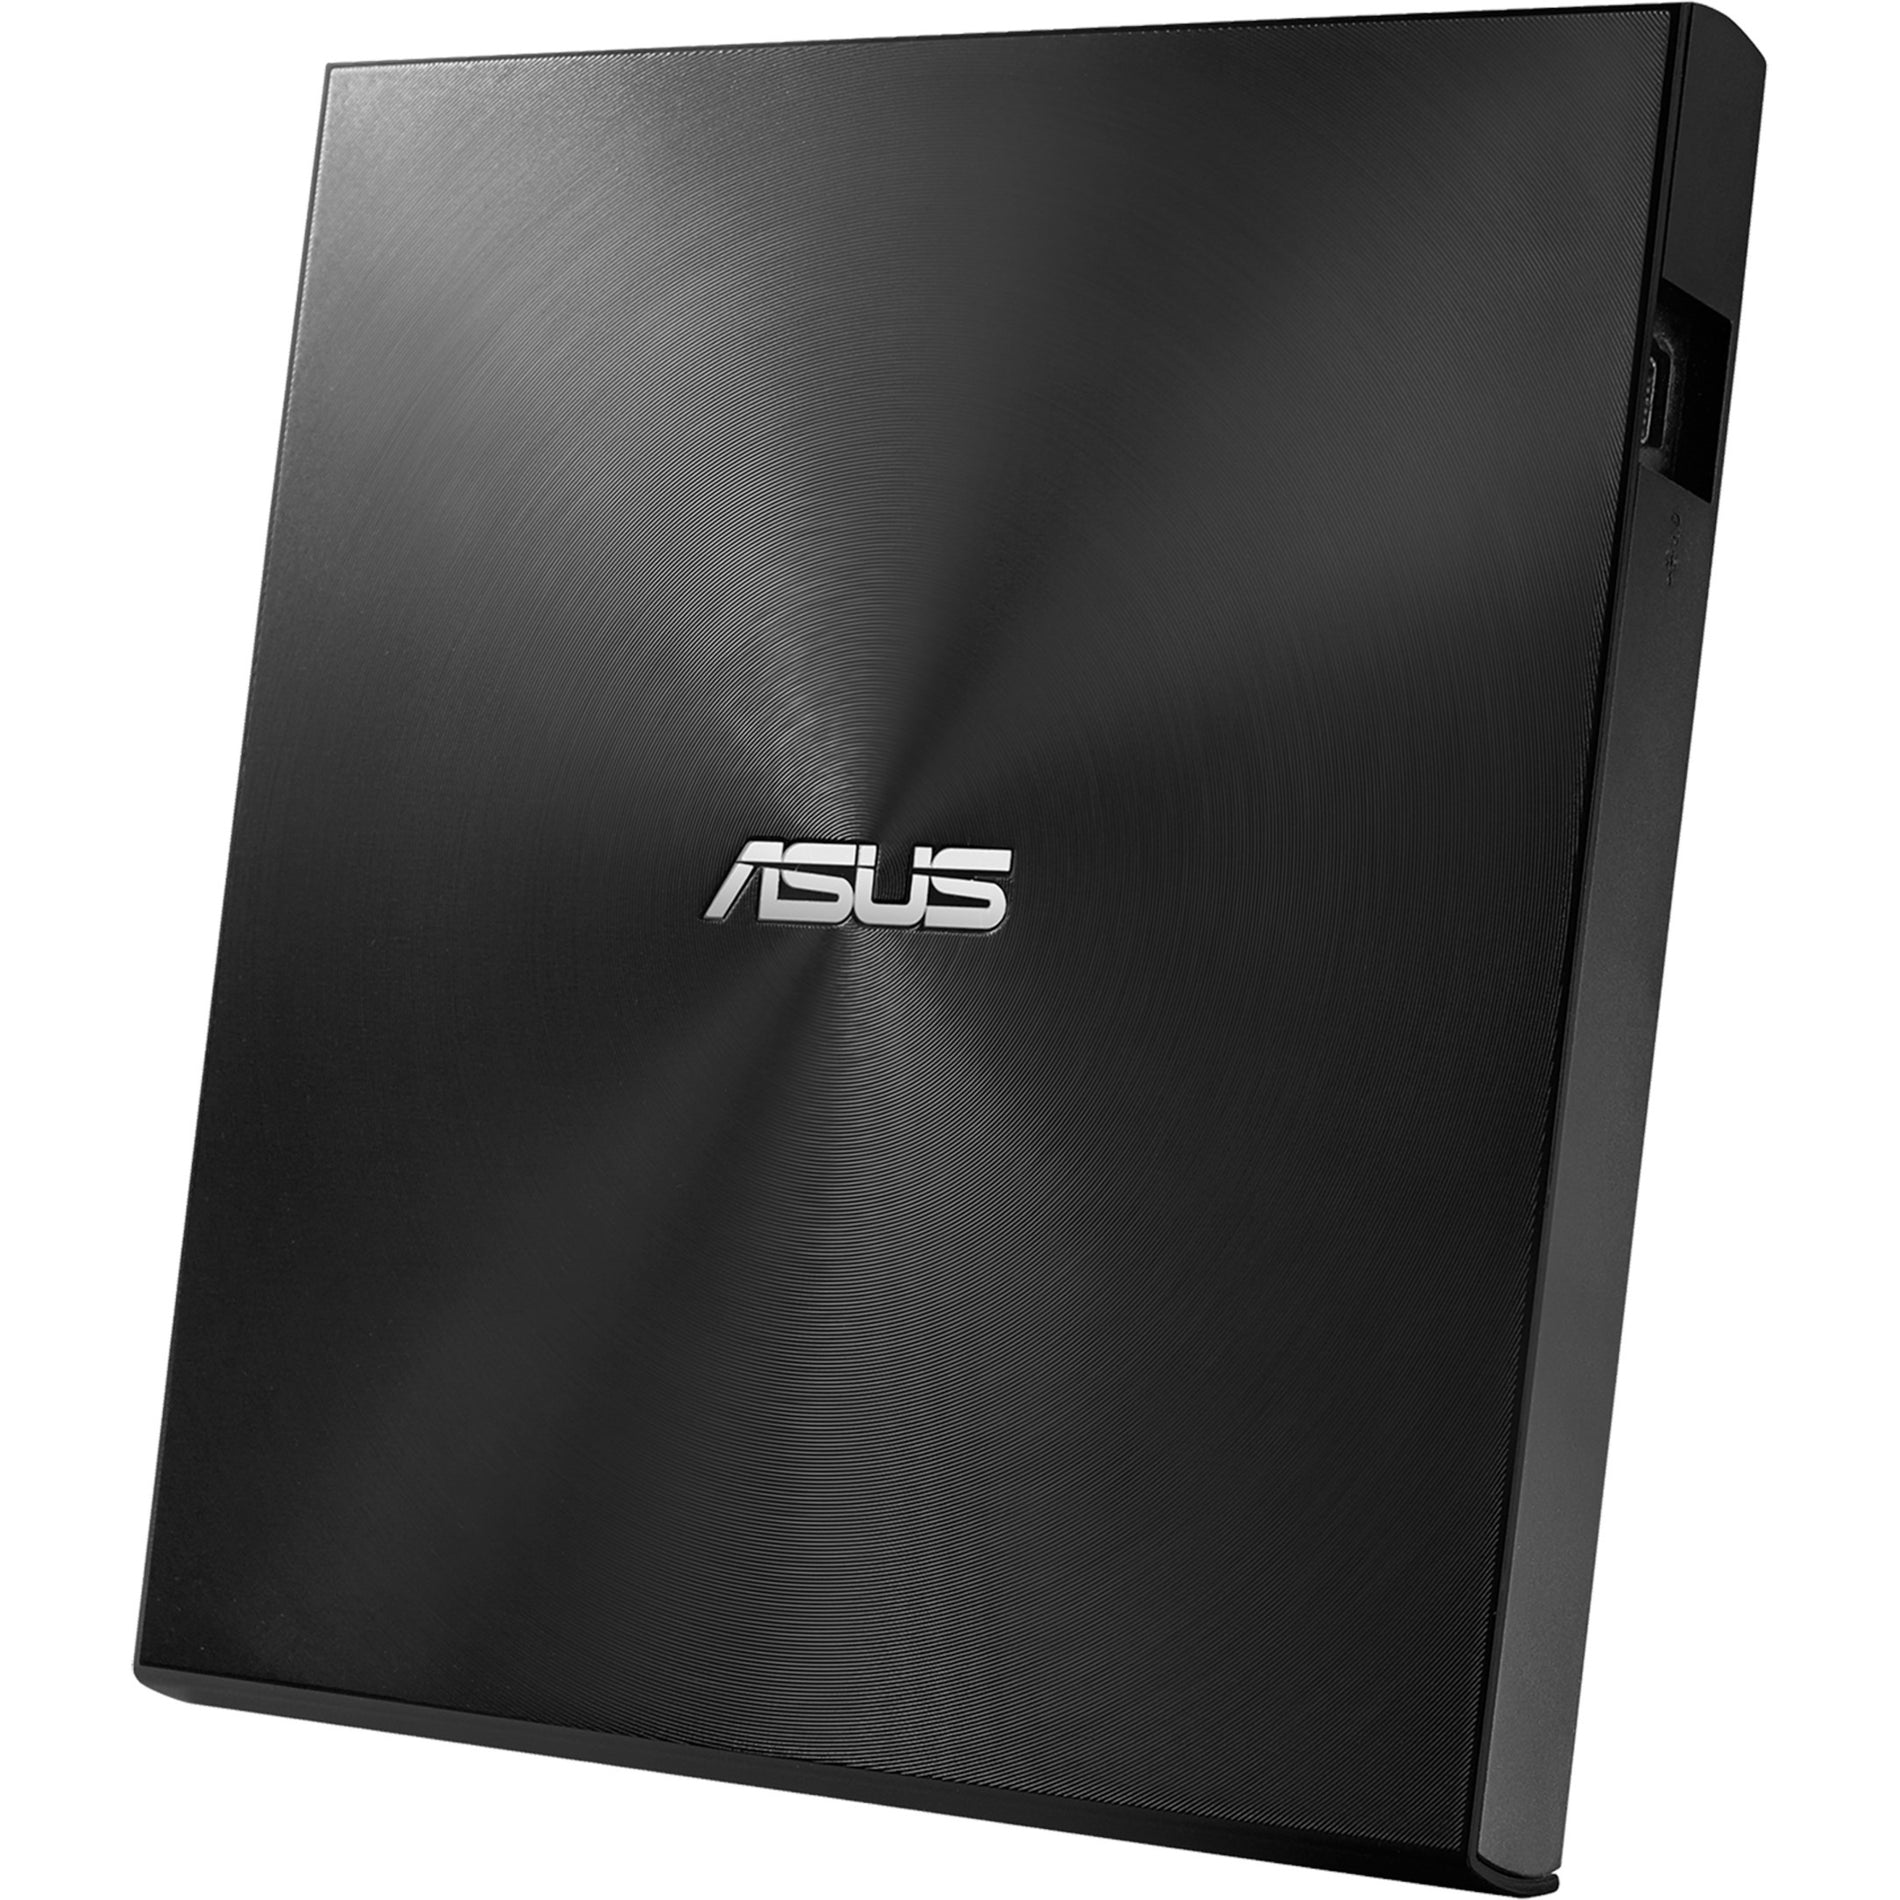 Asus SDRW-08U9M-U/BLK/G/AS/P2G ZenDrive SDRW-08U9M-U, Ultra-Slim External DVD-RW, USB Type-C and Type-A Interfaces